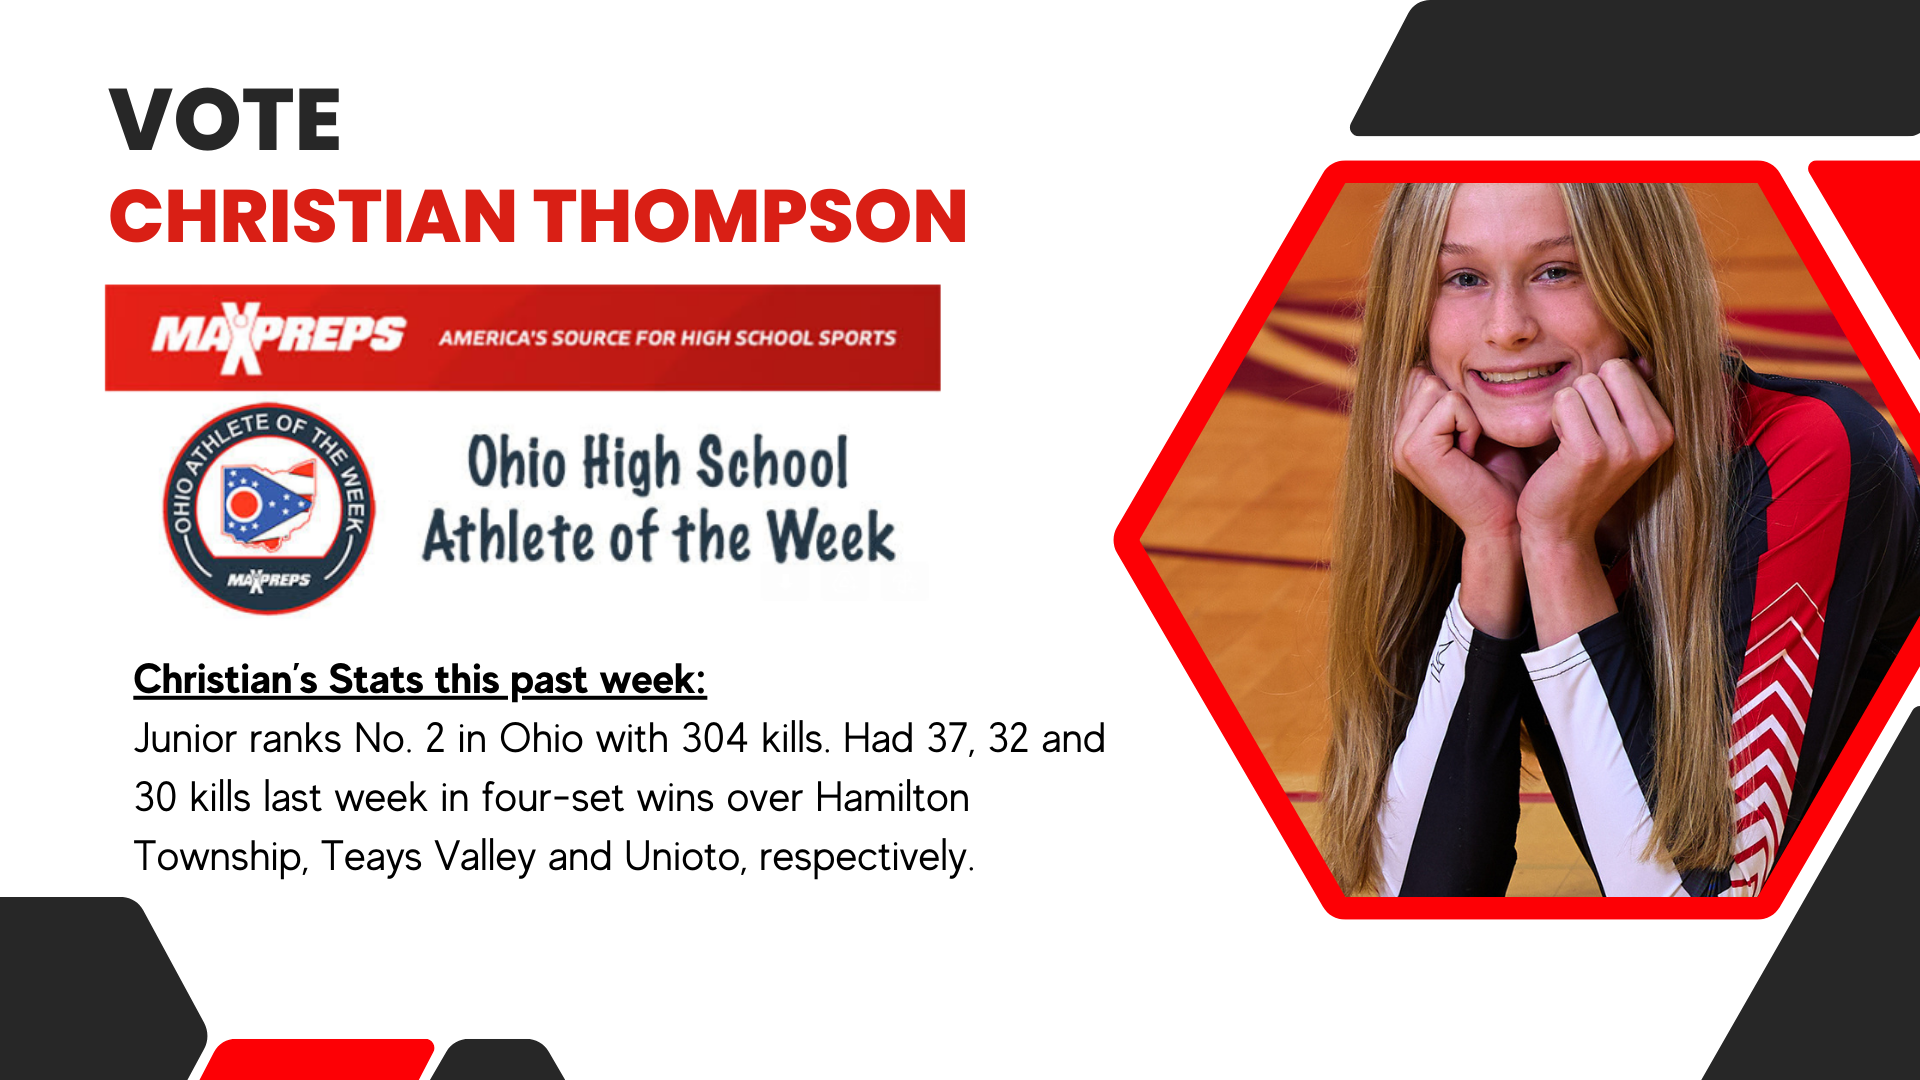 Vote for Christian Thompson, MaxPreps Athlete of the Week